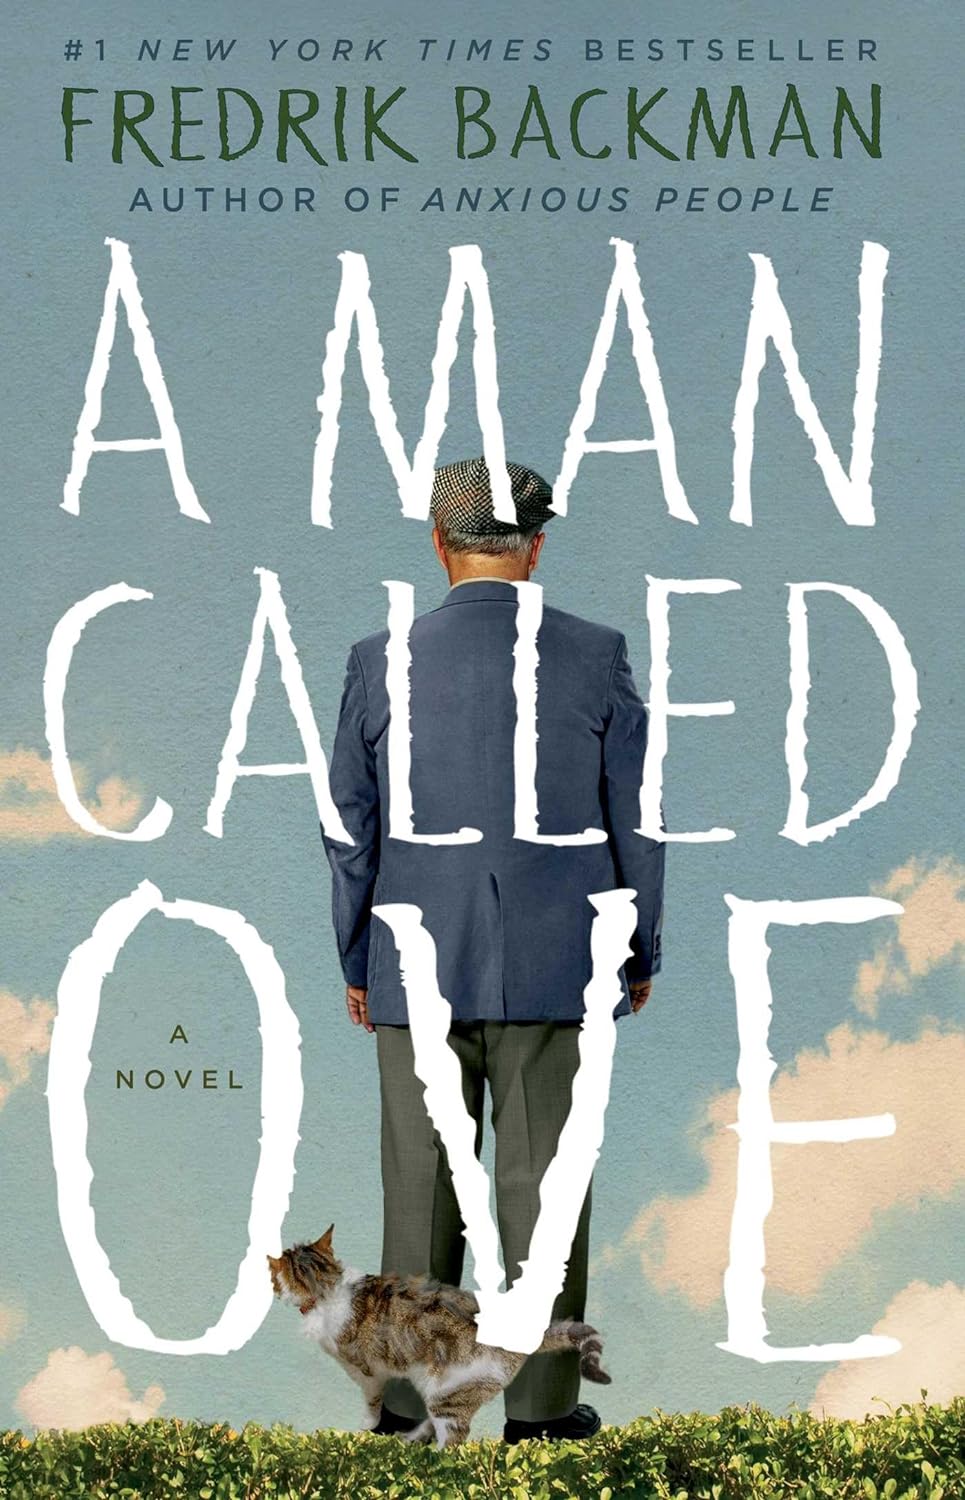 book with man on cover